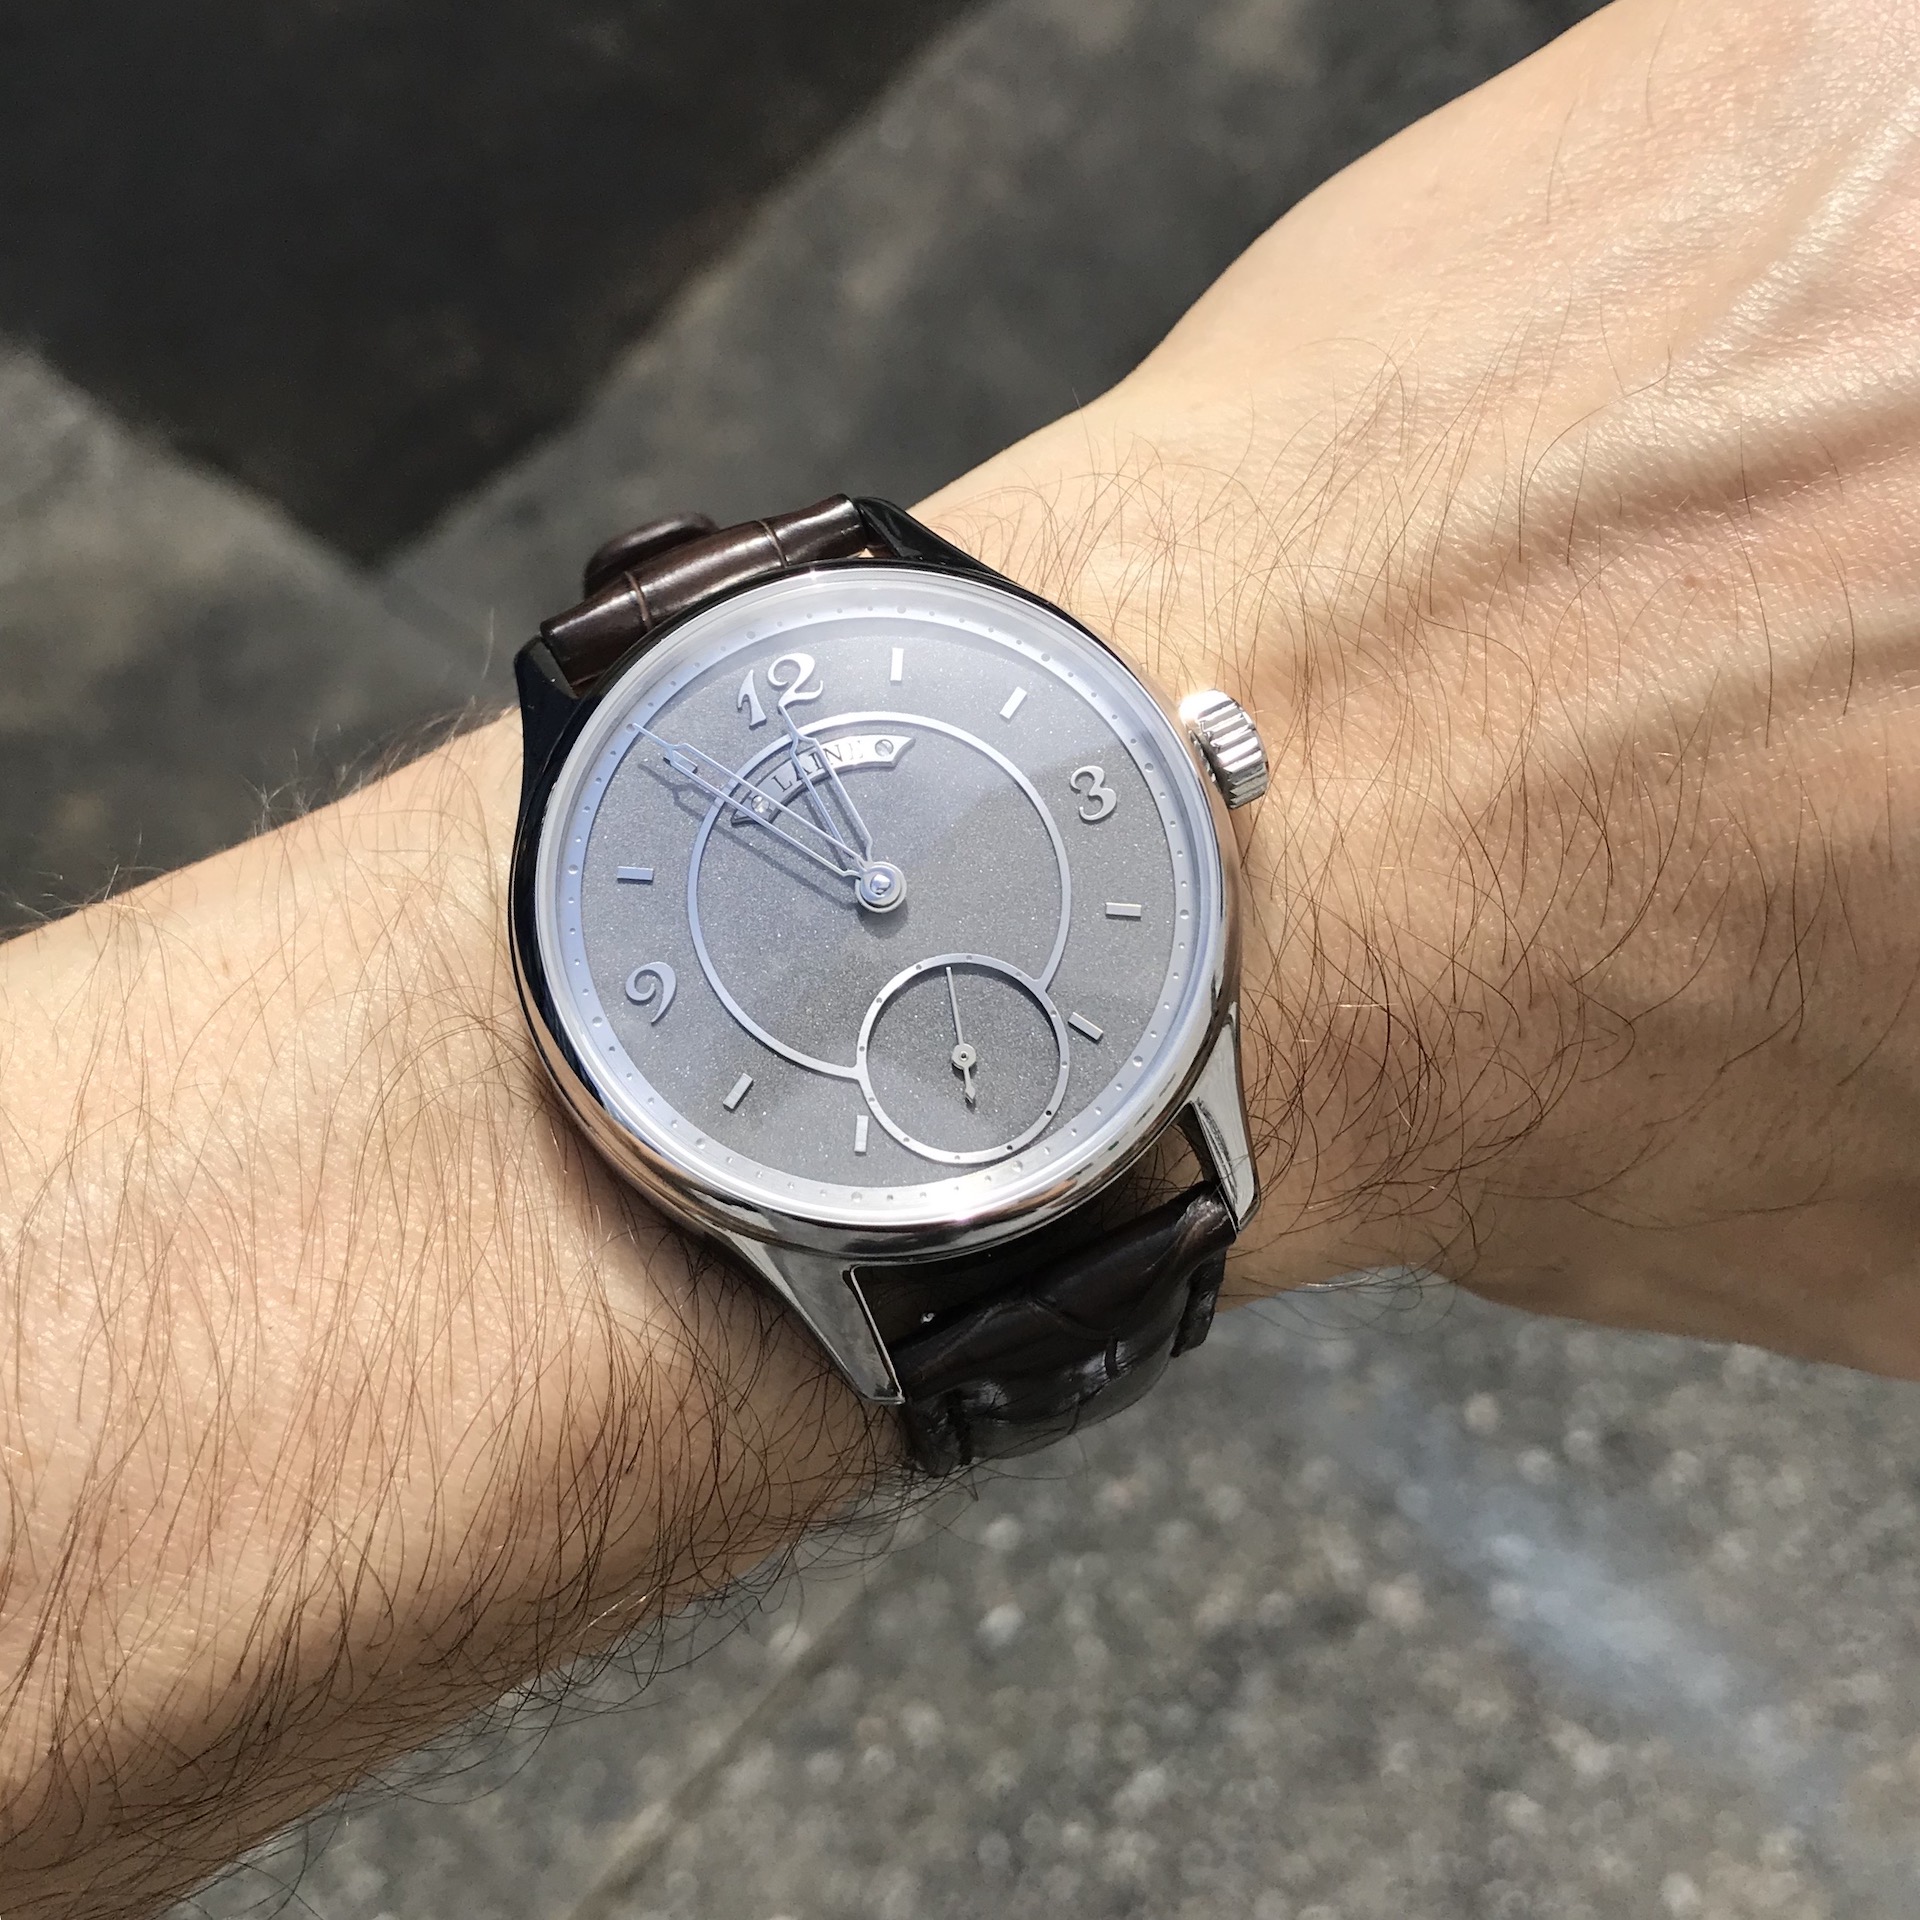 Owner Review: Laine Gelidus 2 – An Entry To Independent Watchmaking